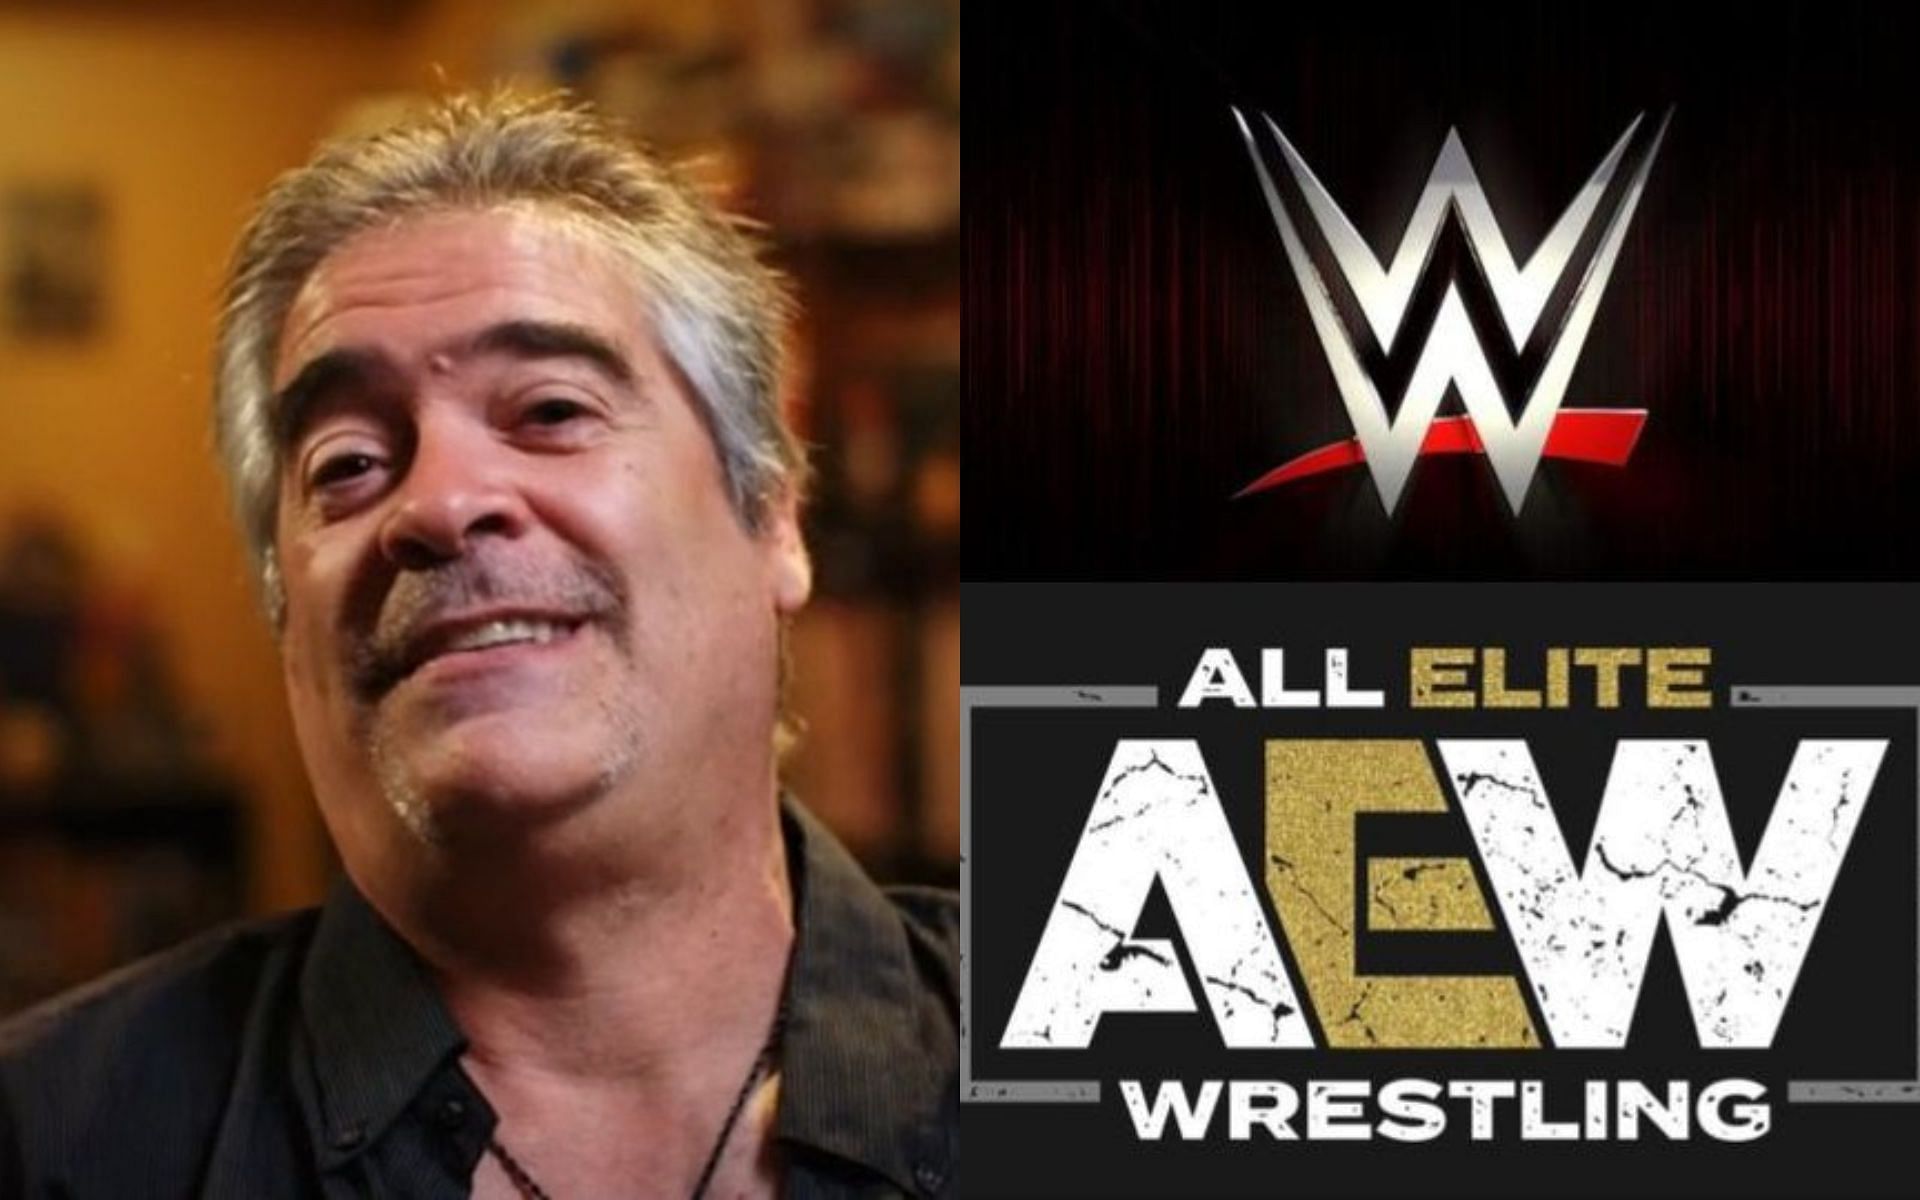 WWE veteran Vince Russo heaped praise on this current AEW star.